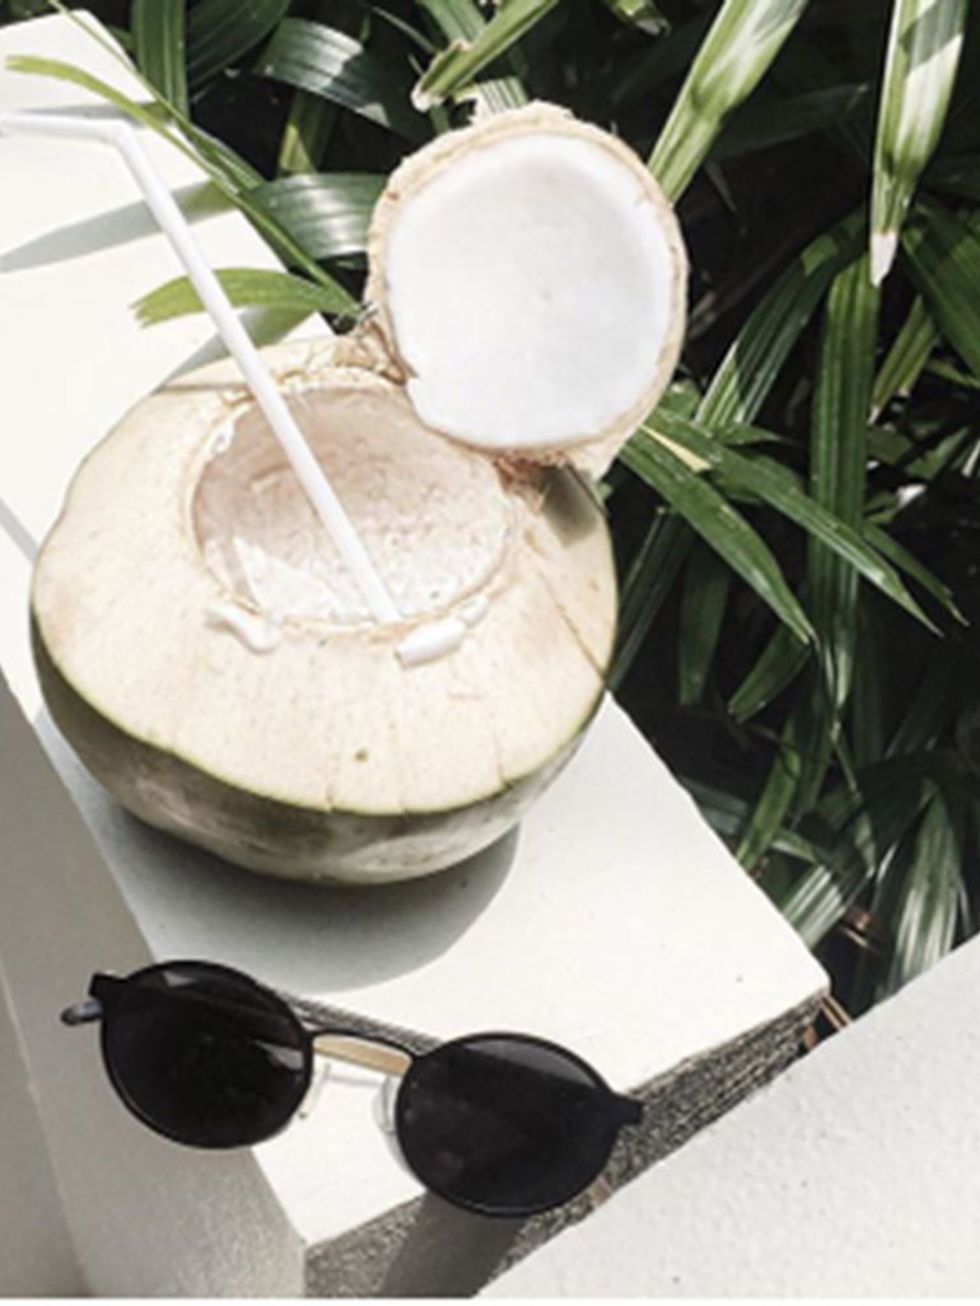 <p><strong>The Classic Coconut Shot </strong></p>

<p>Ditch the Vitacoco and grab a real coconut, position some sunnies accidentally nearby. #refreshed</p>

<p>Picture: @charliemay</p>